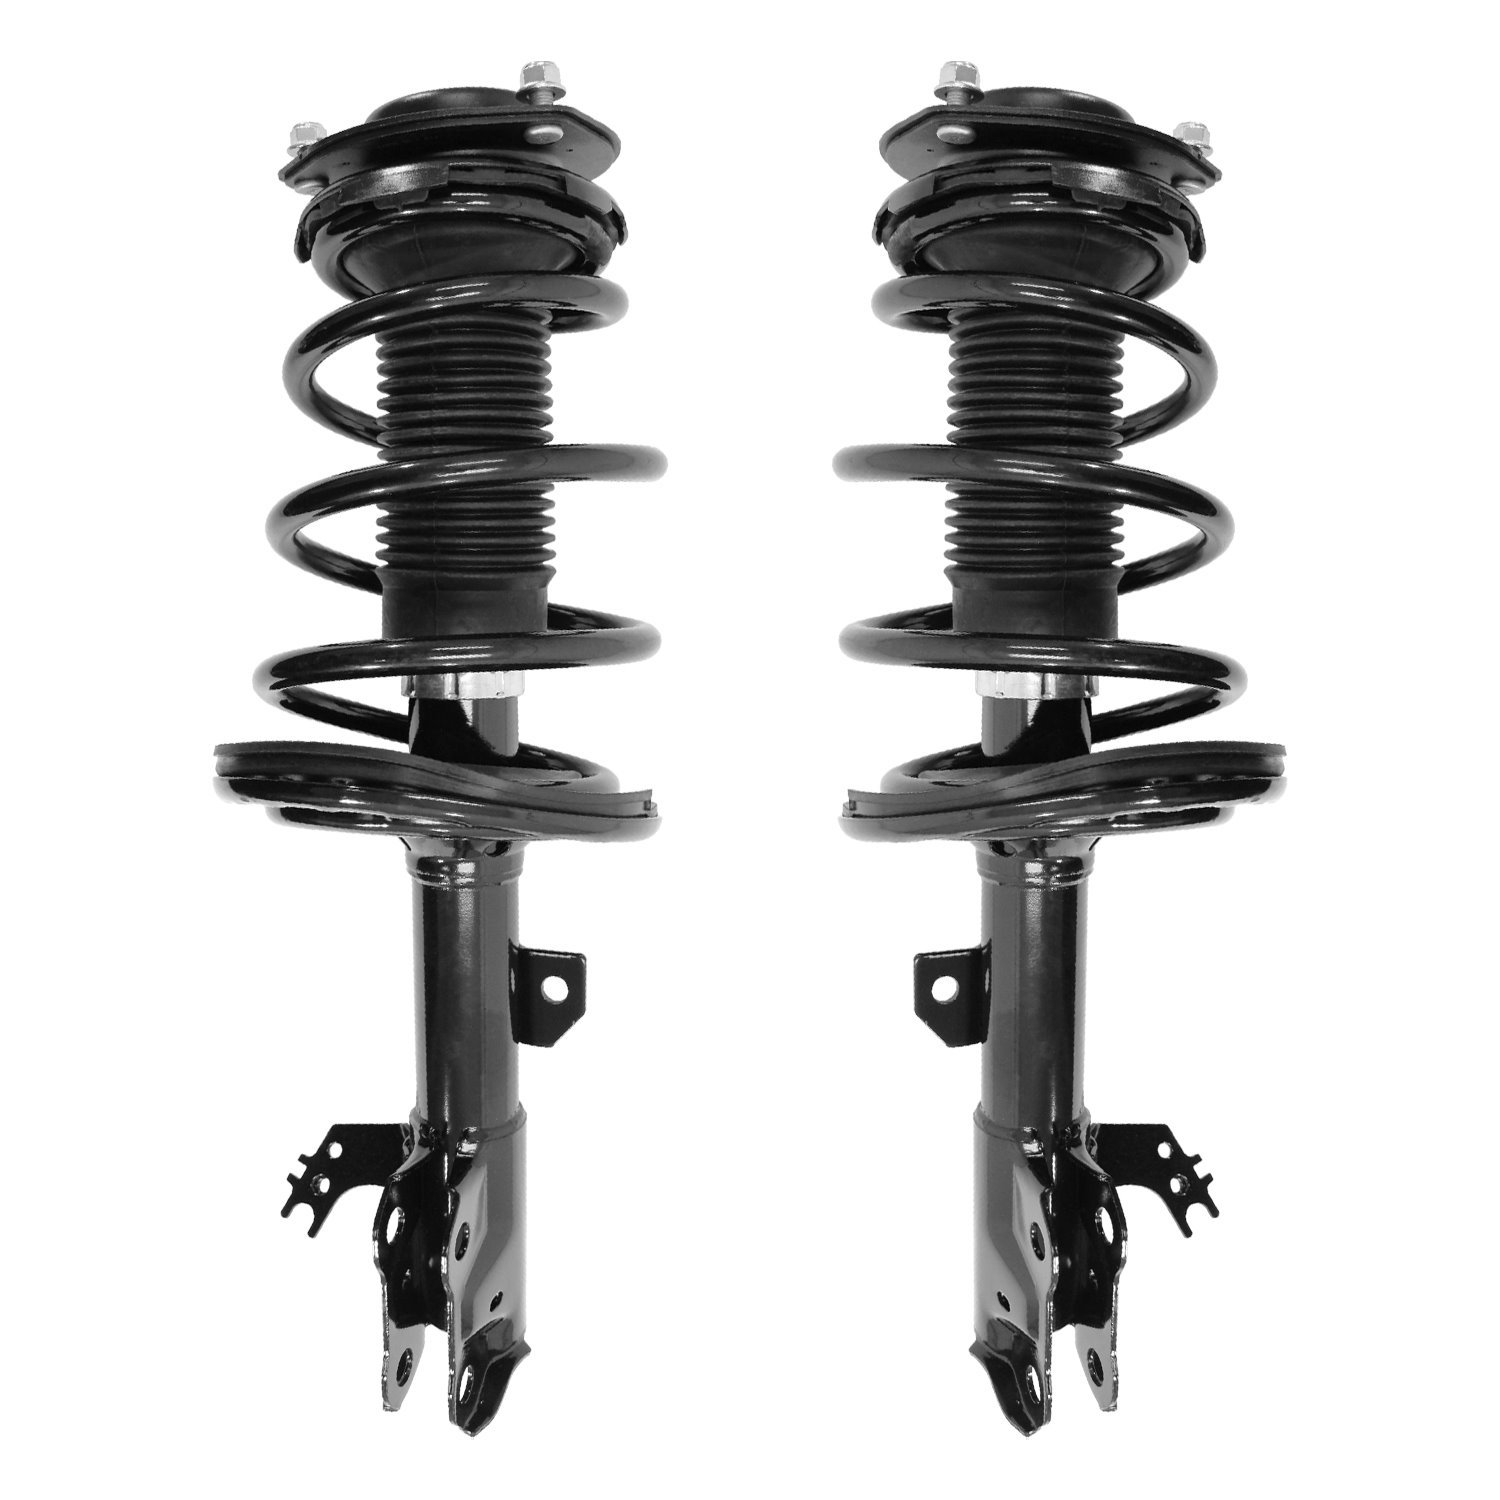 2-13281-13282-001 Front Suspension Strut & Coil Spring Assemby Set Fits Select Toyota Avalon